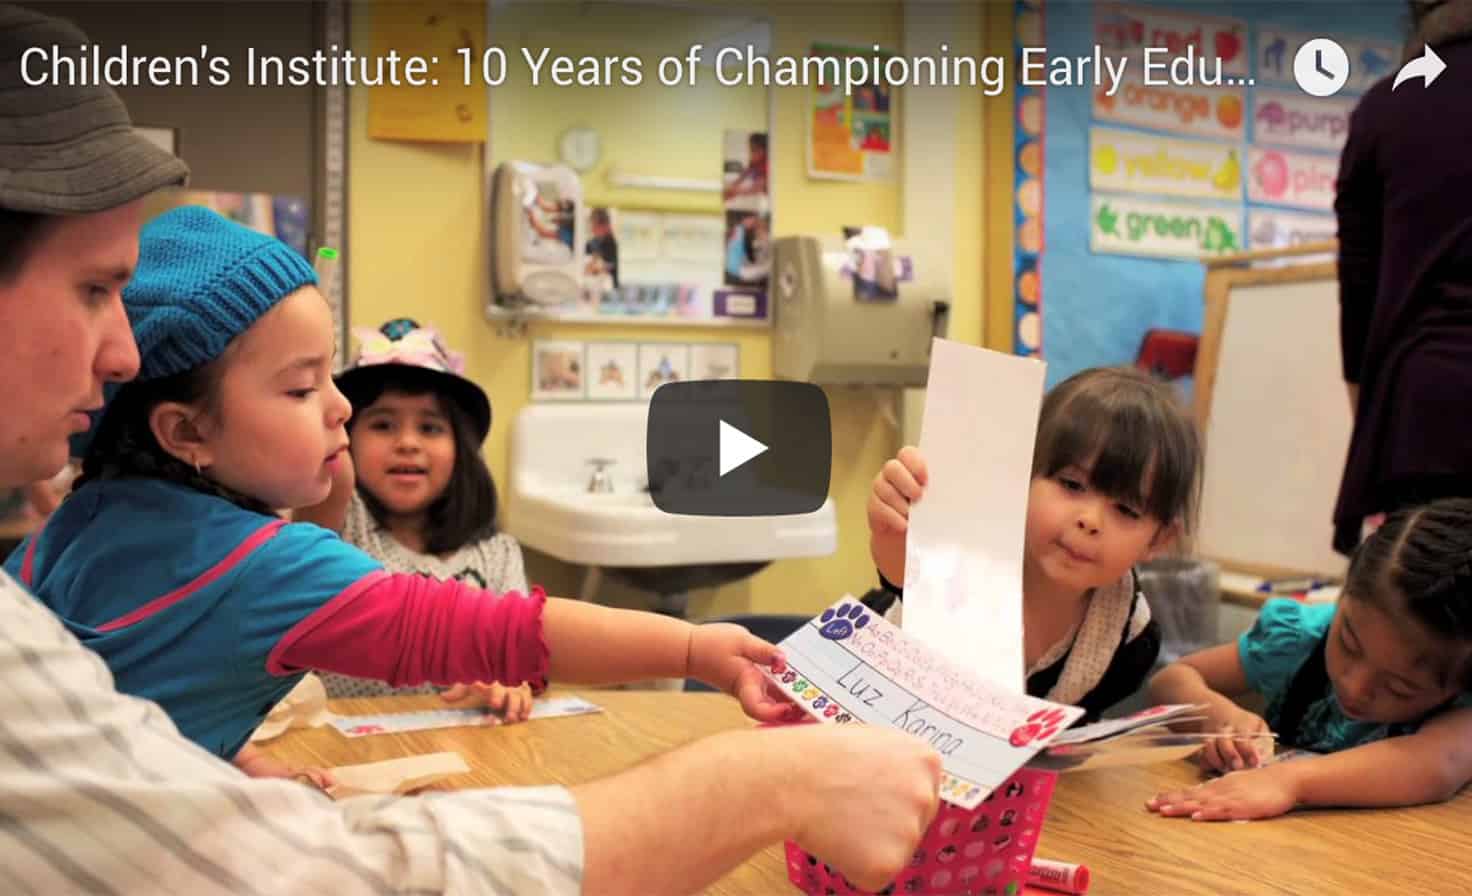 Children's Institute: 10 Years of Championing Early Education